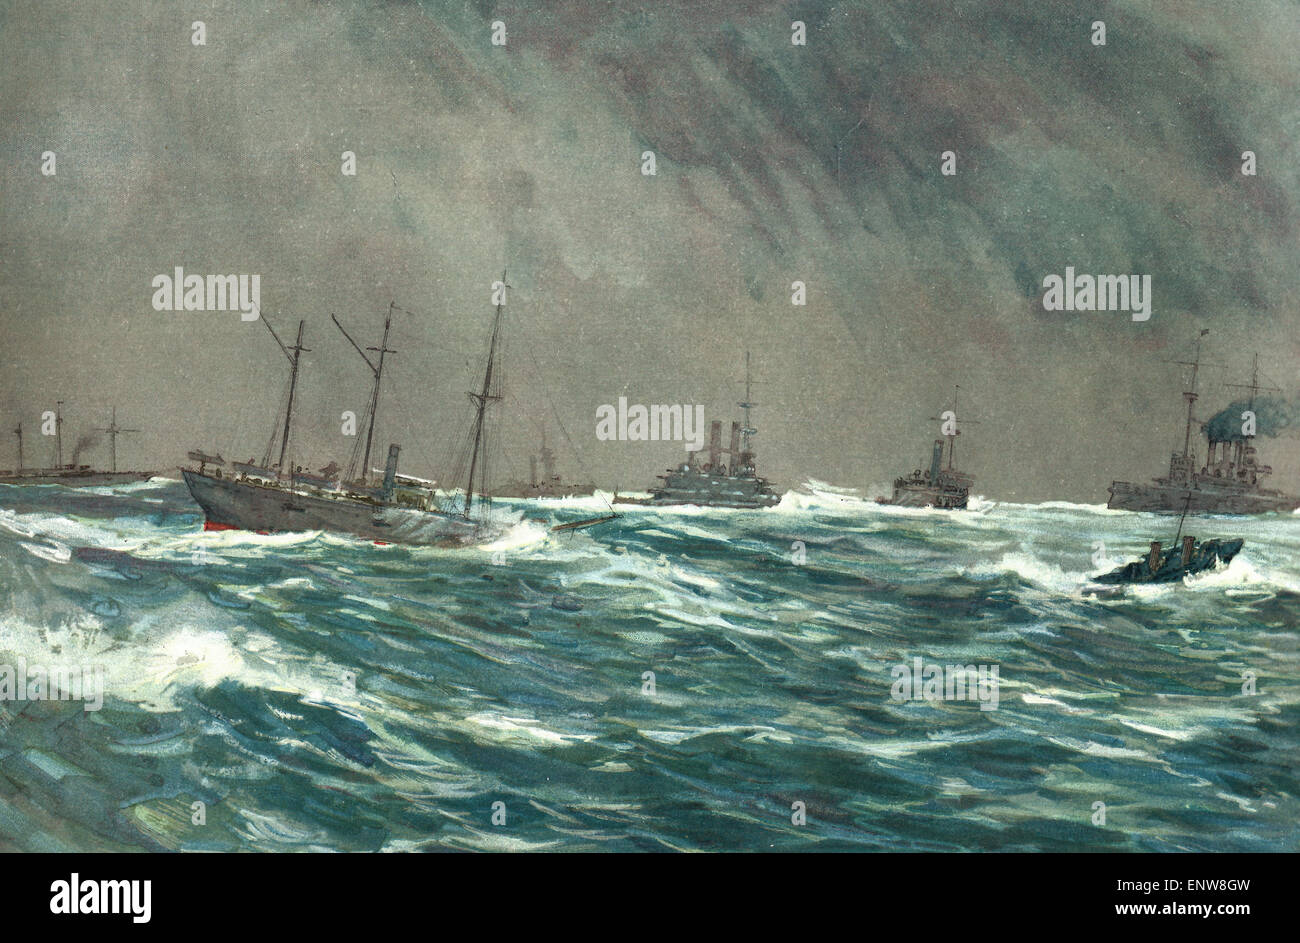 United States Warships in a blow - Squally weather off the Cuban Coast - USS Newport, USS Annapolis, USS Wilmington, USS Indiana, USS Miantonomoh, USS Foote, USS New York - Spanish American War Stock Photo